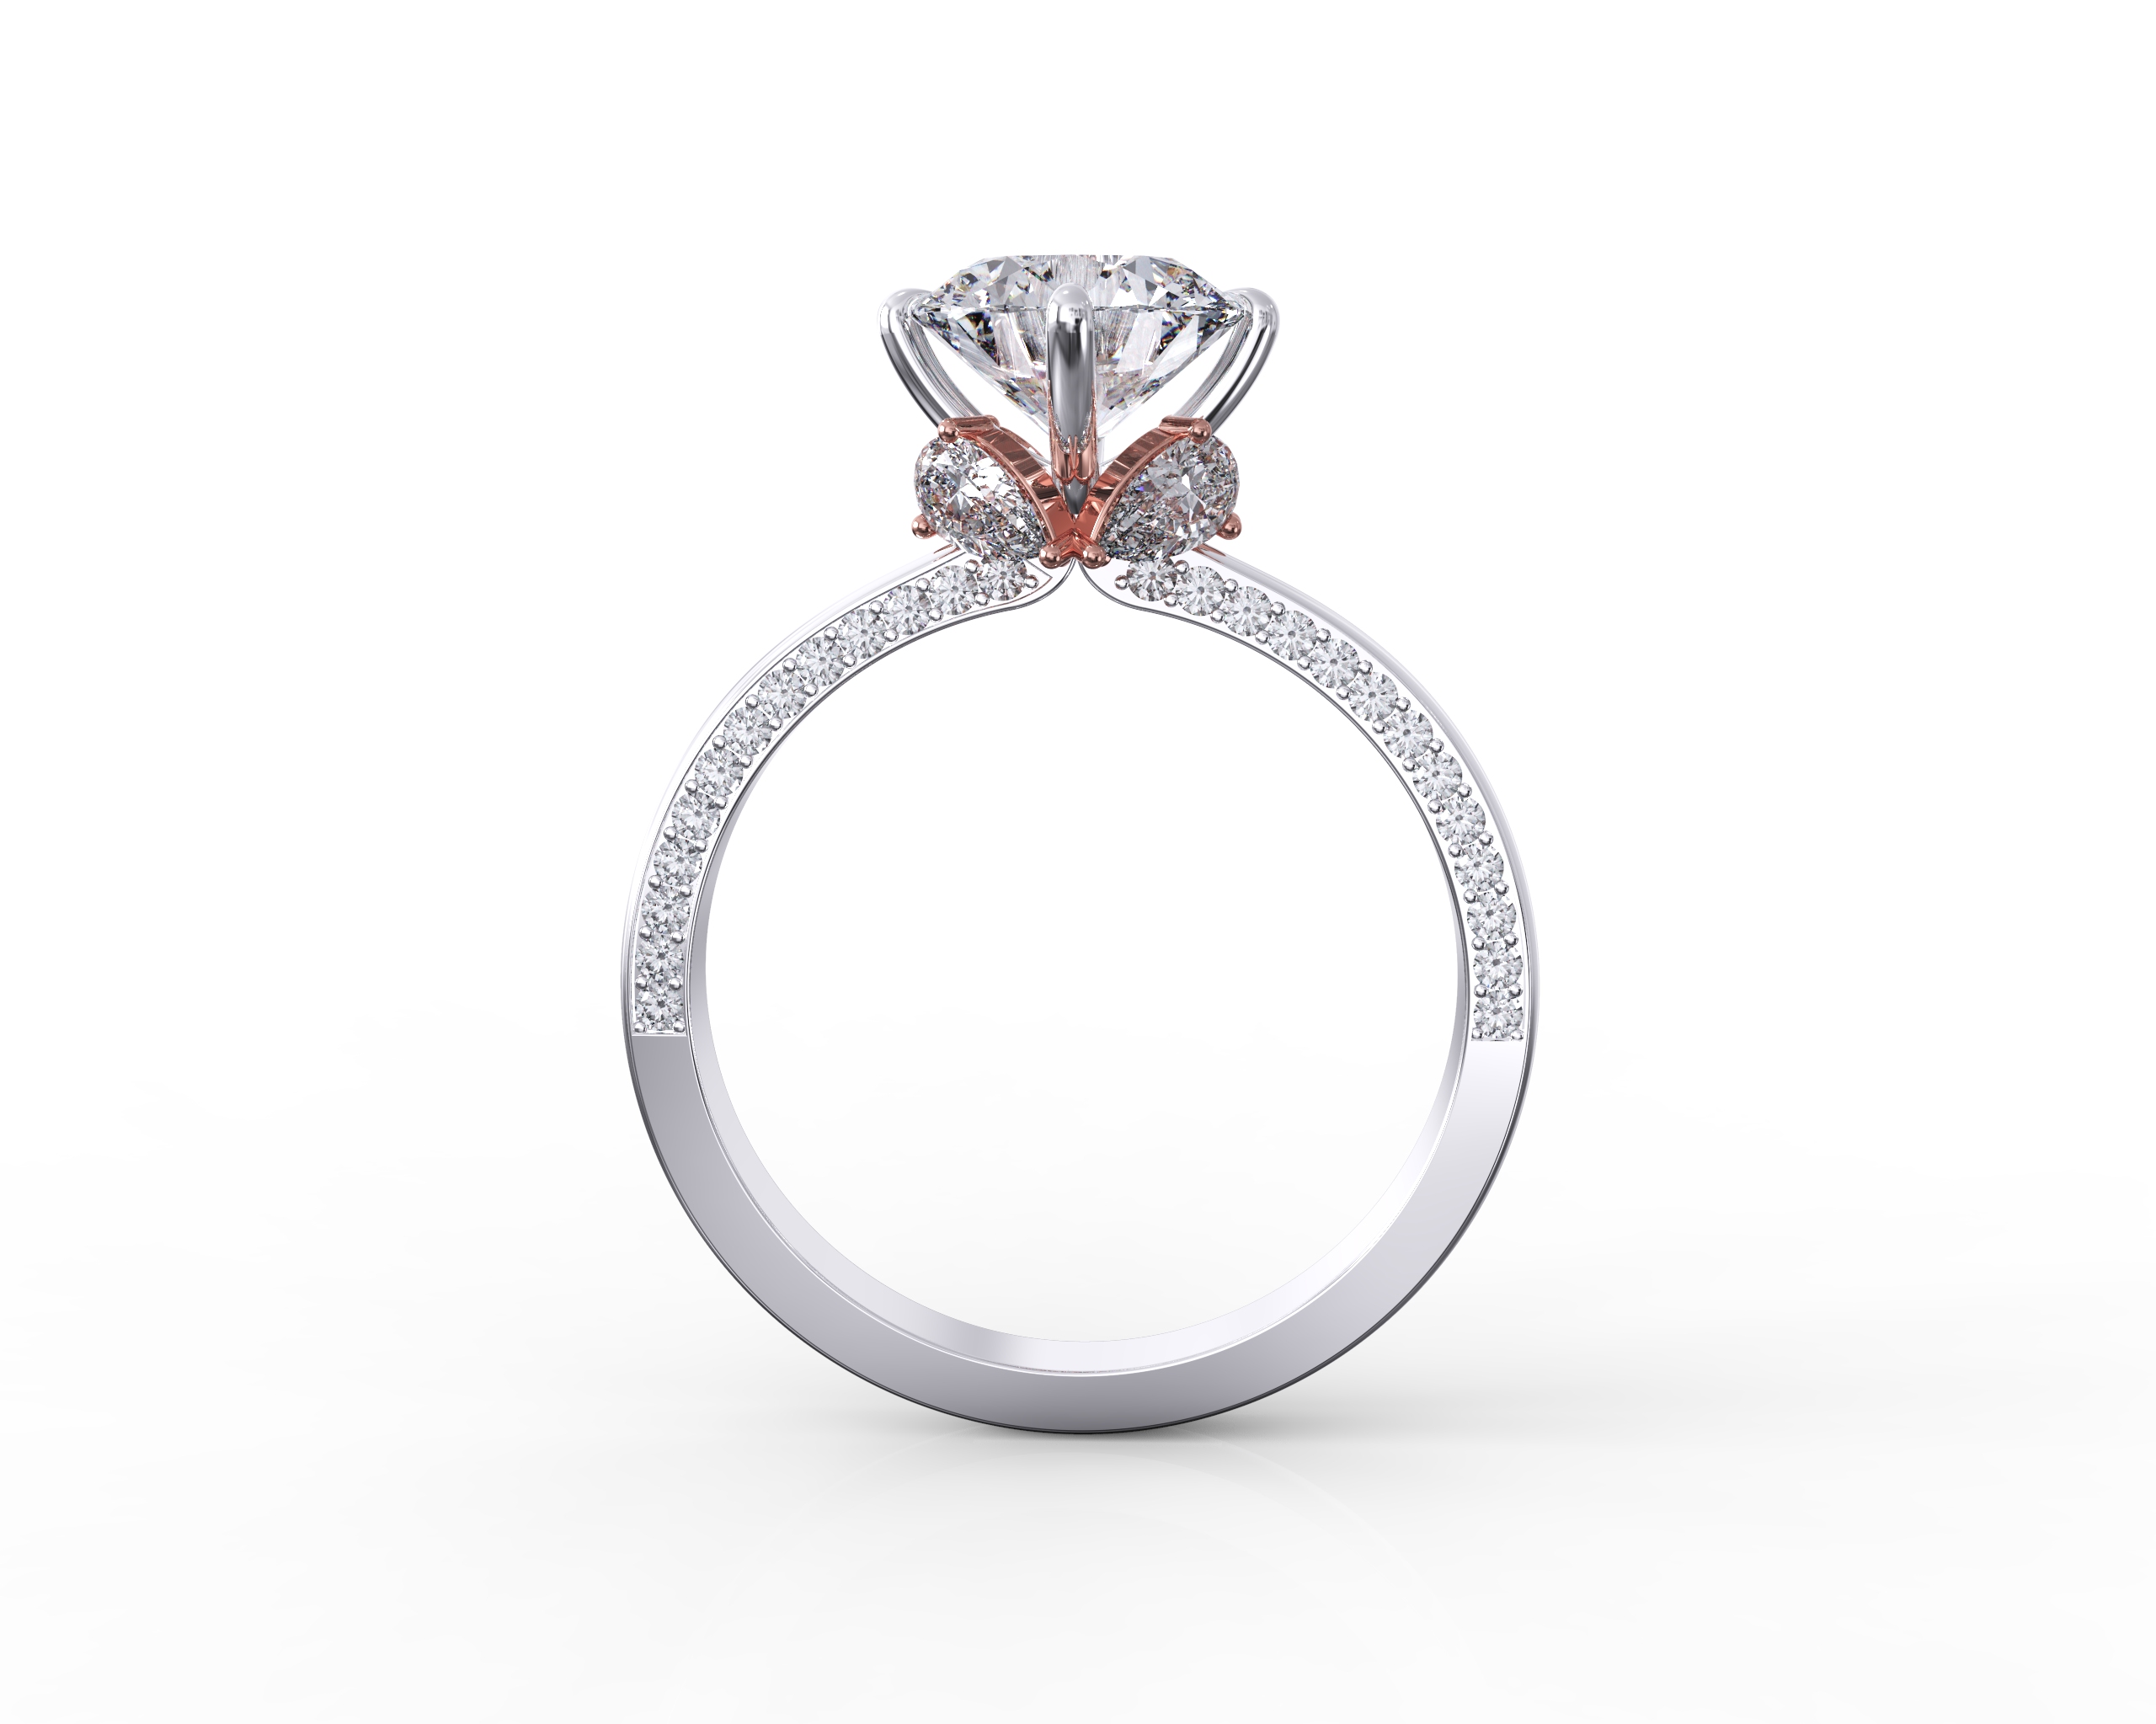 Solitaire Diamond Ring with Rose Gold Details